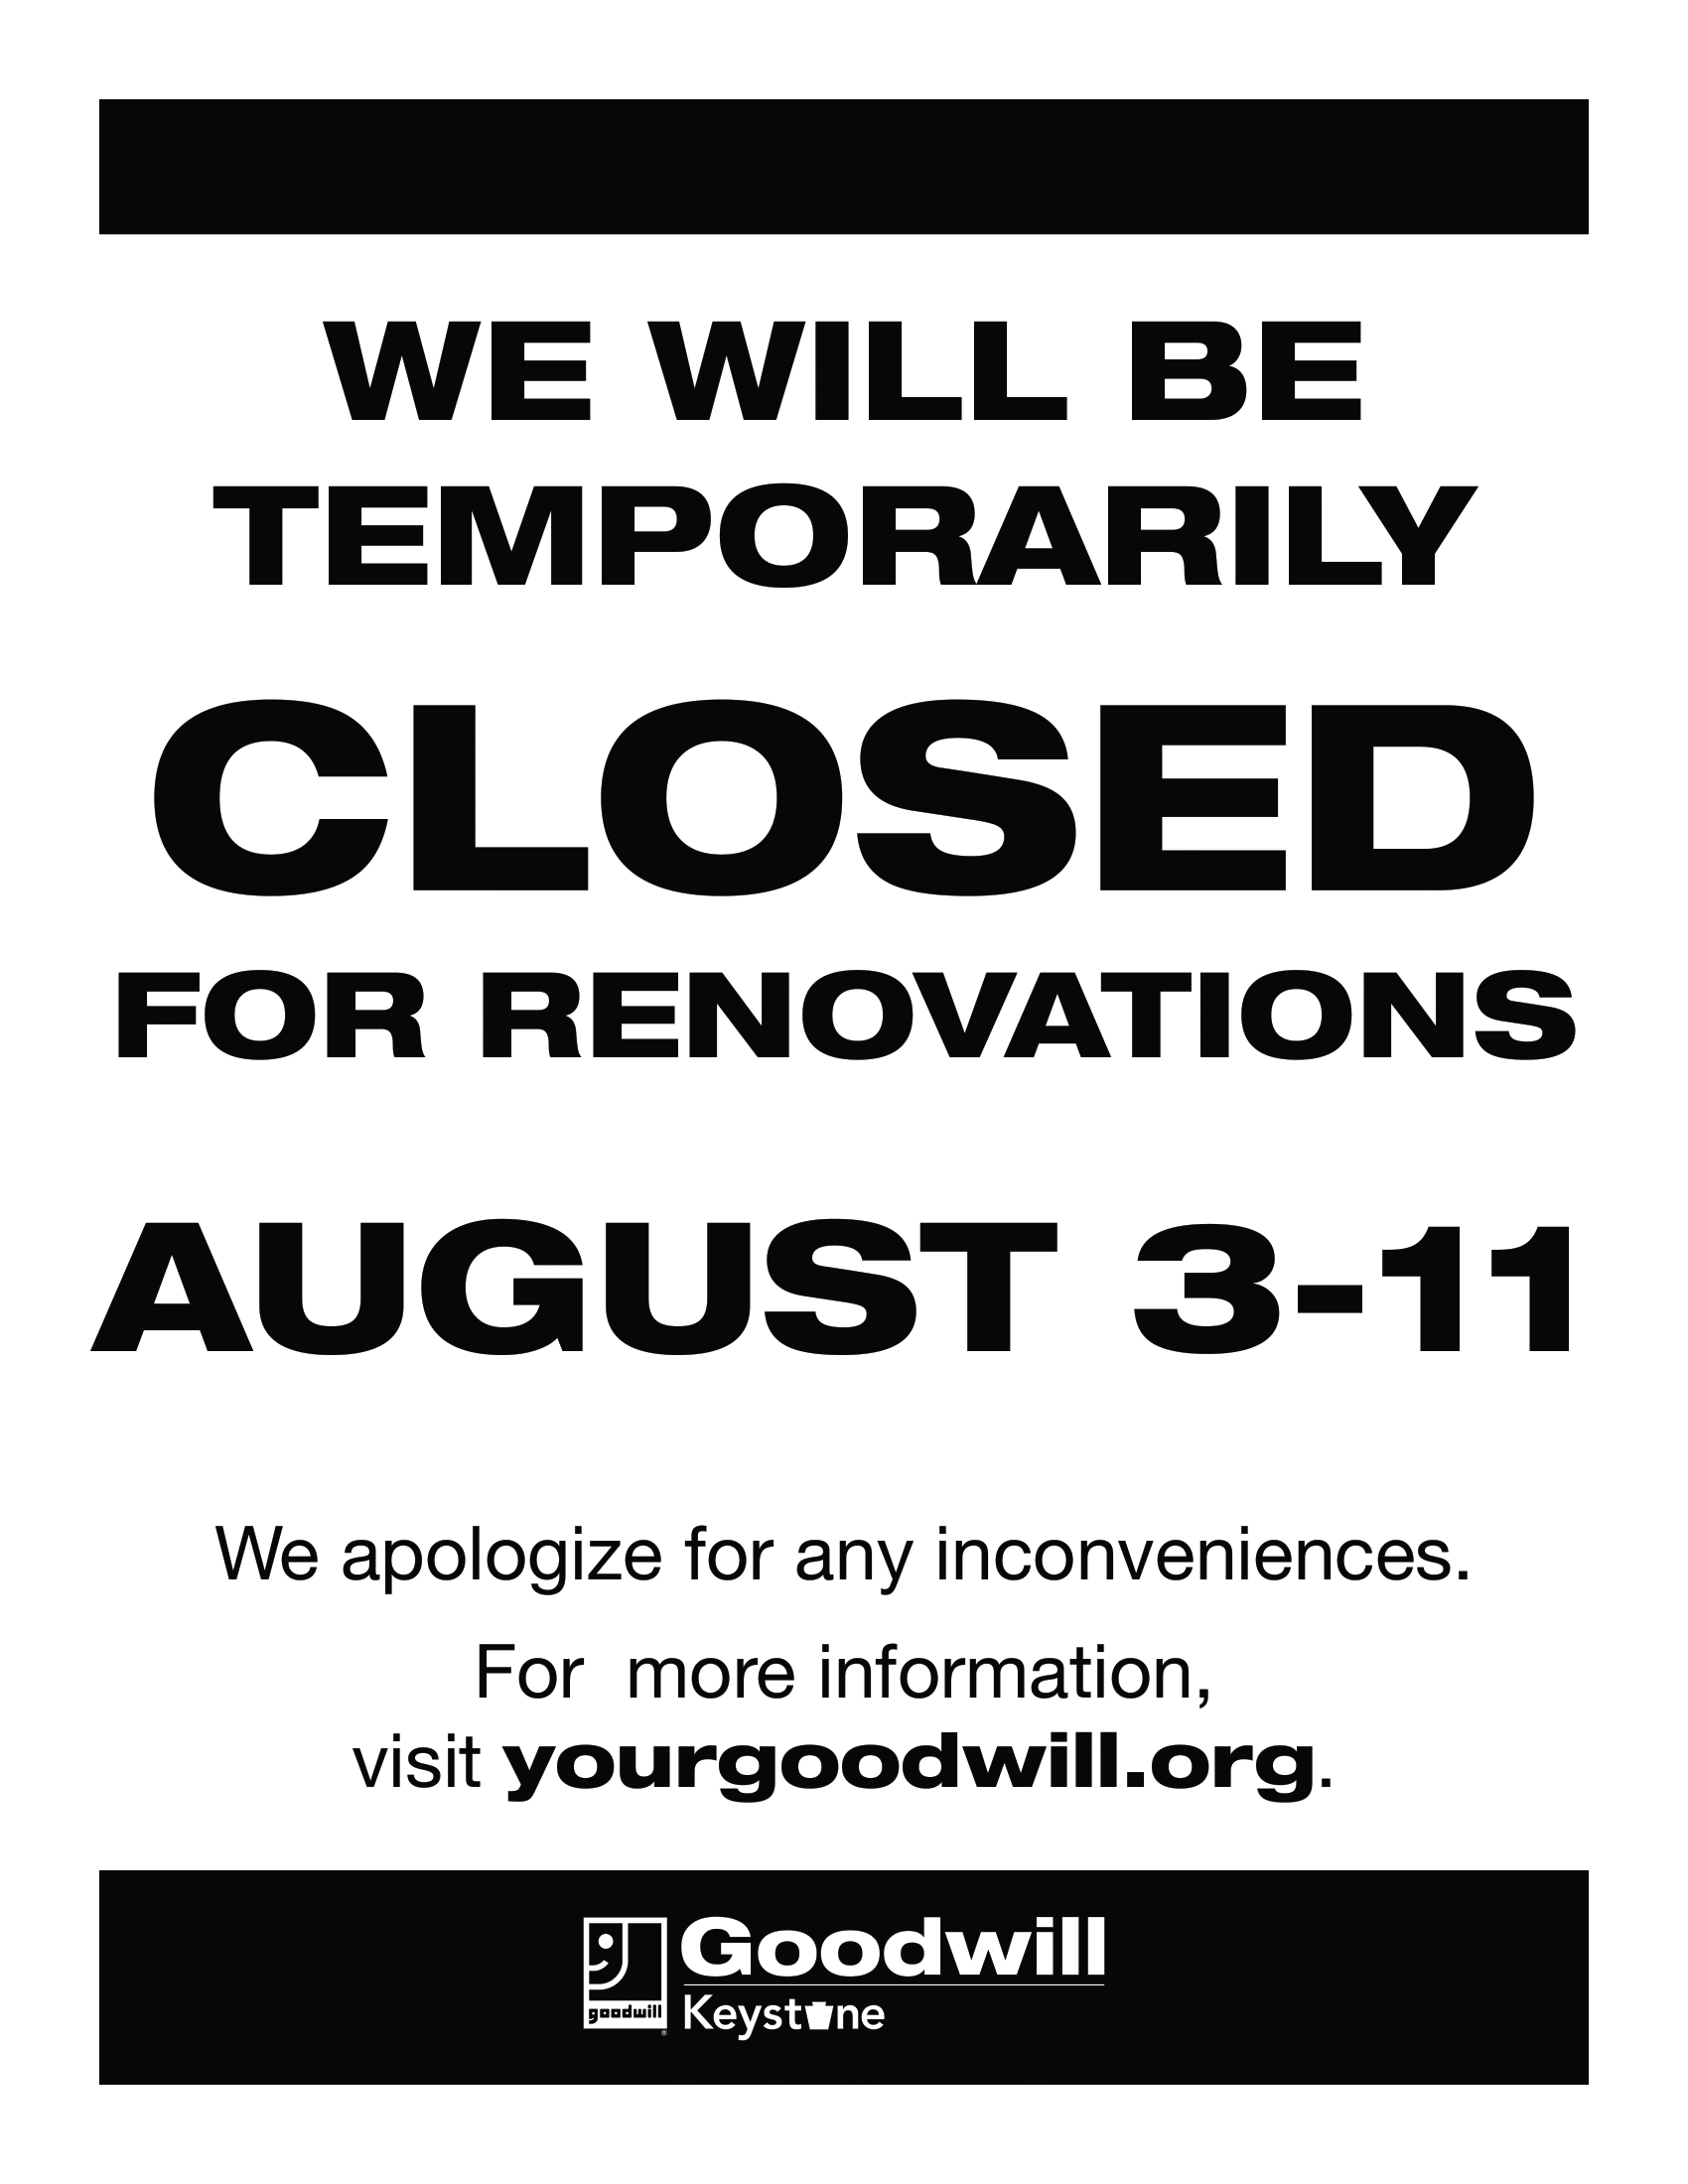 Robesonia Goodwill Store Undergoes Renovation, Set to Reopen August 12